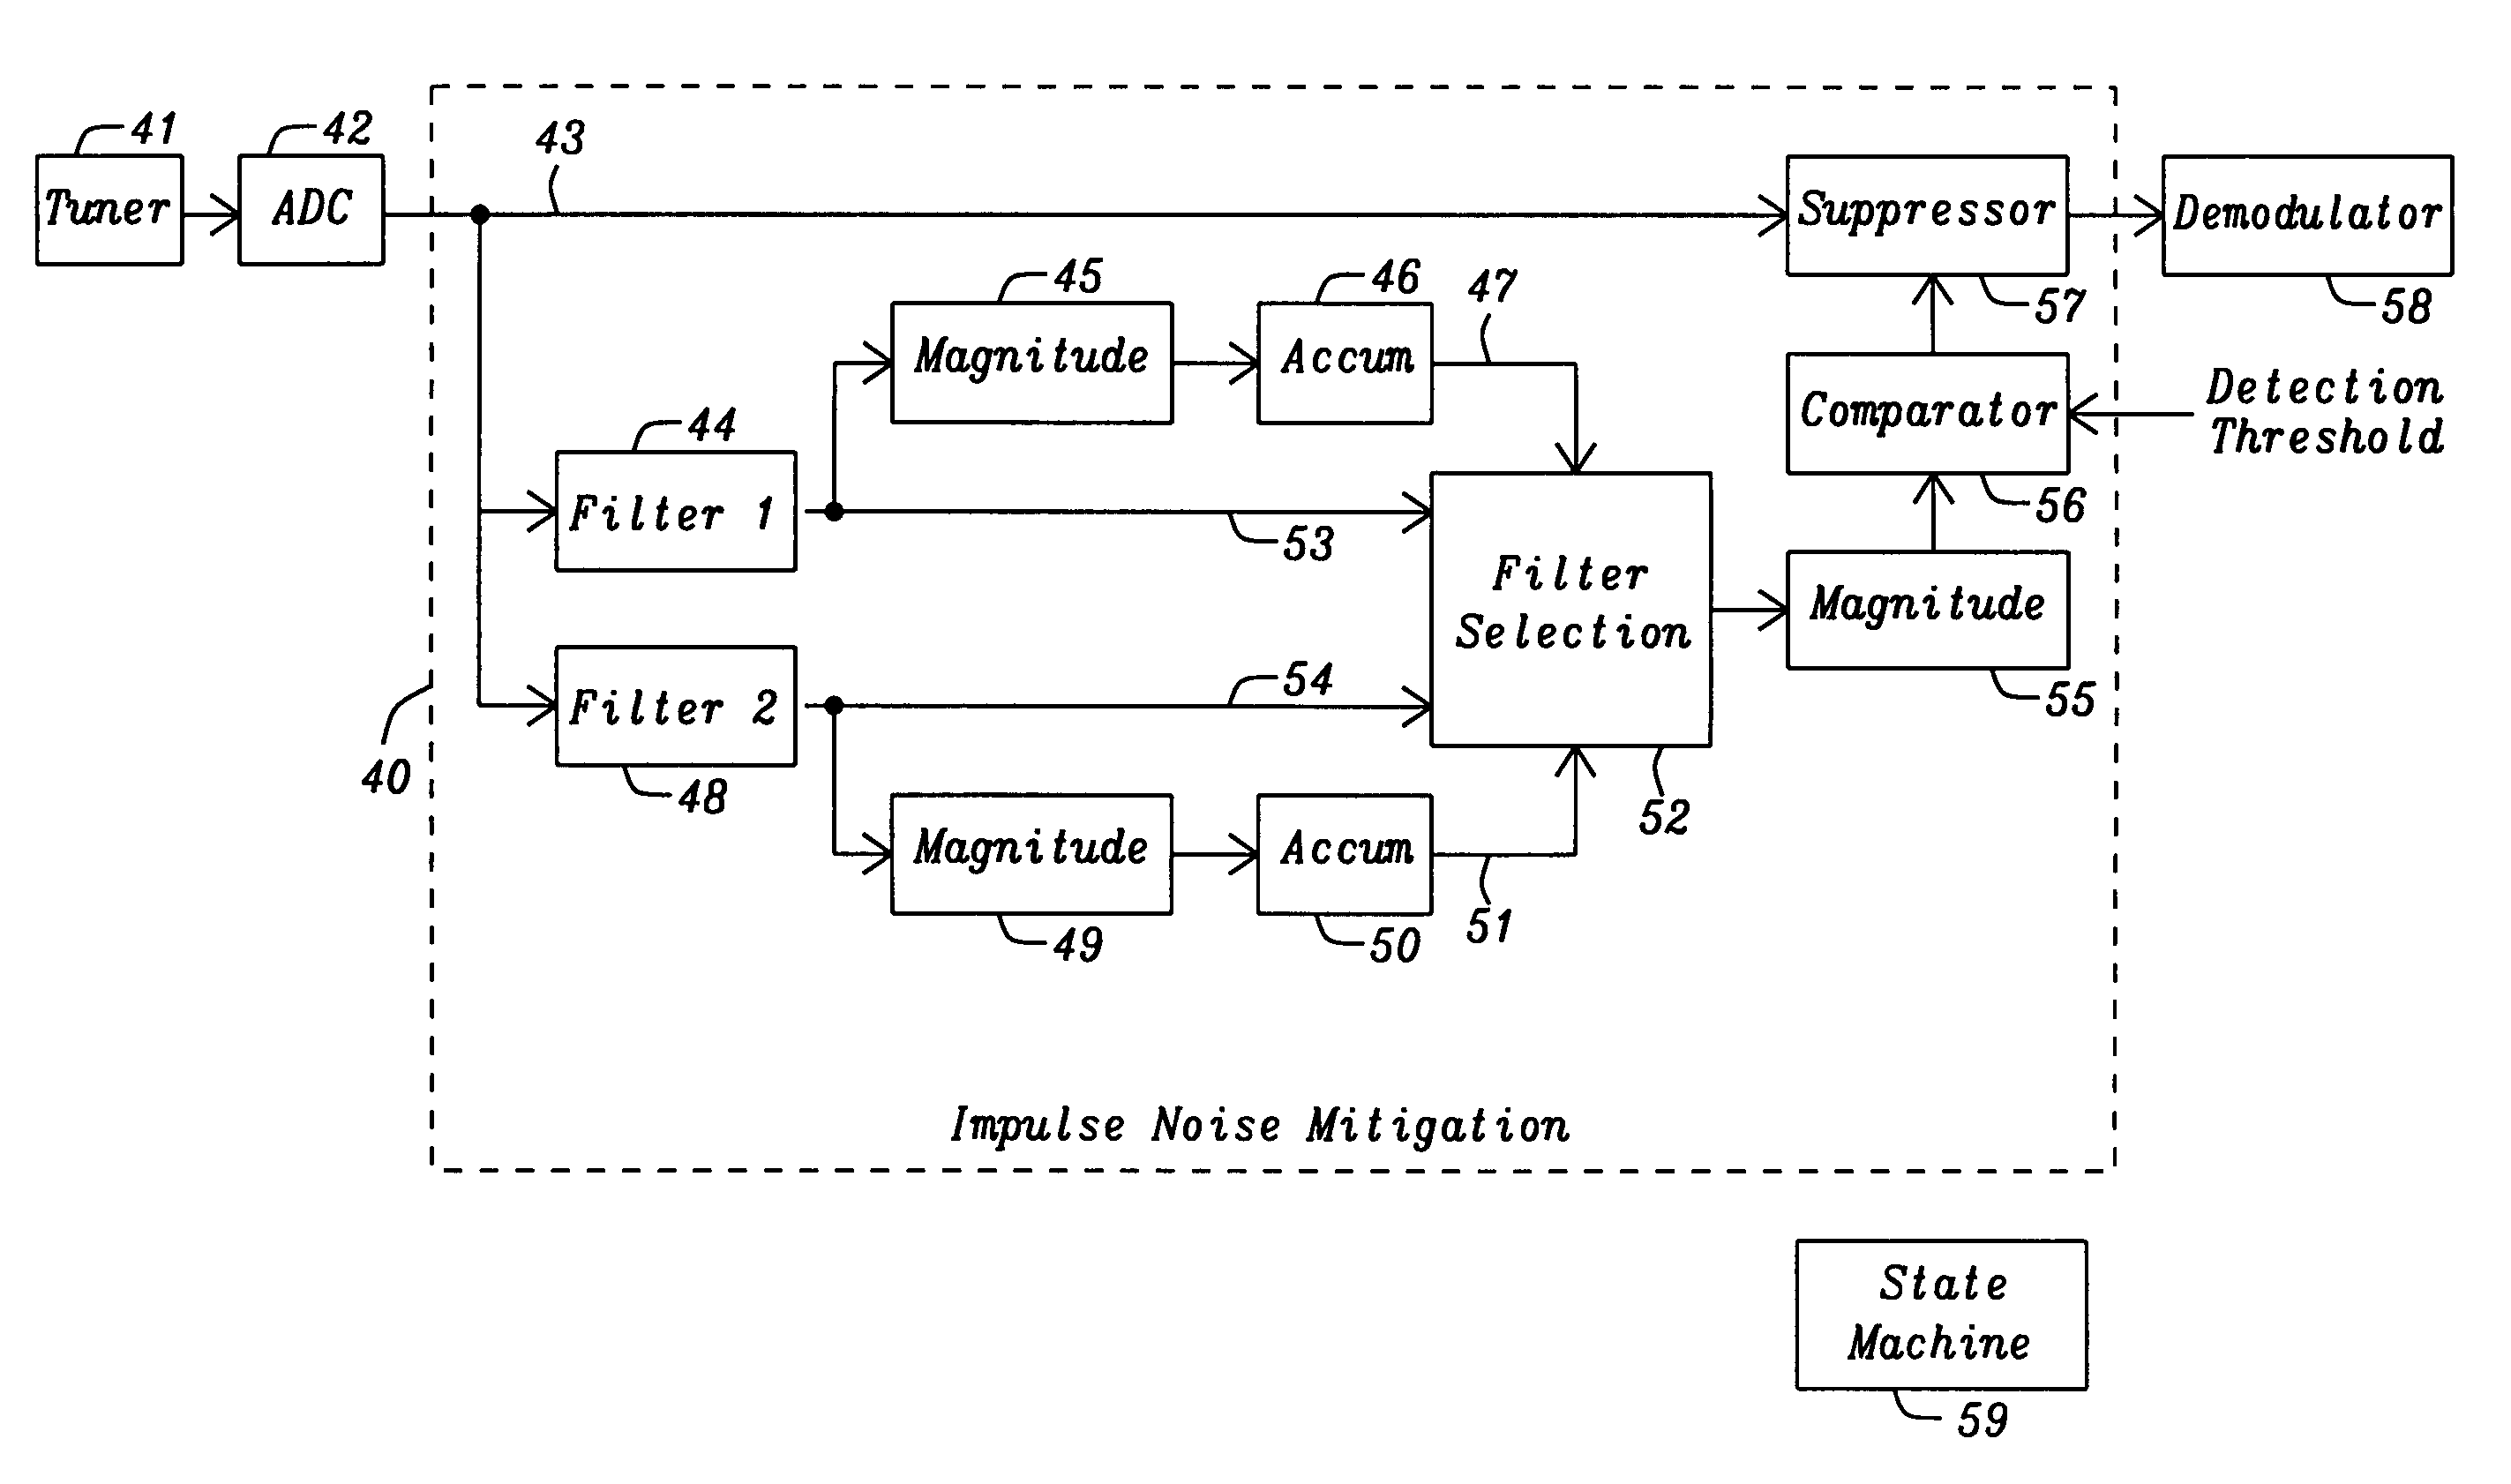 Impulse noise mitigation under out-of-band interference conditions